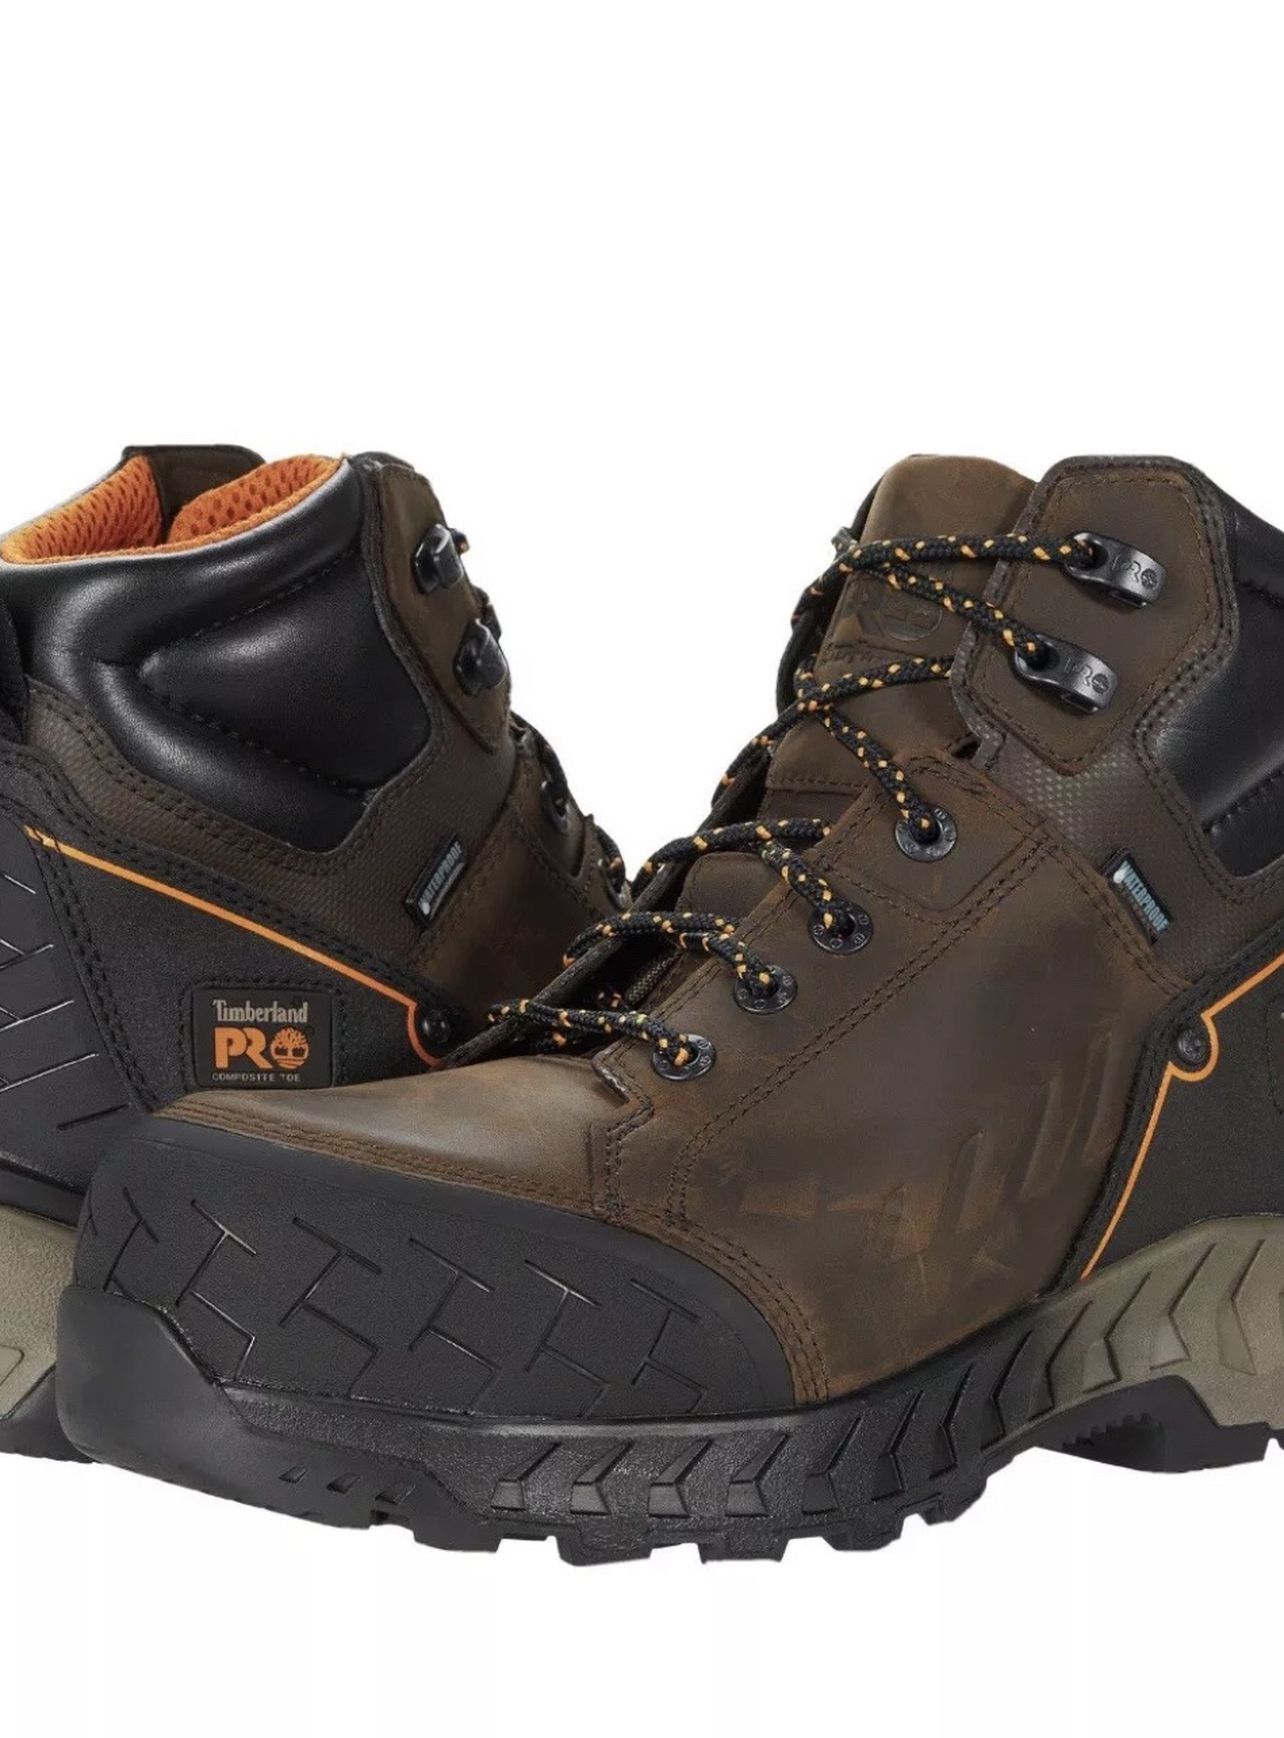 Timberland PRO Work Summit 6" Composite Safety Toe Waterproof work boots